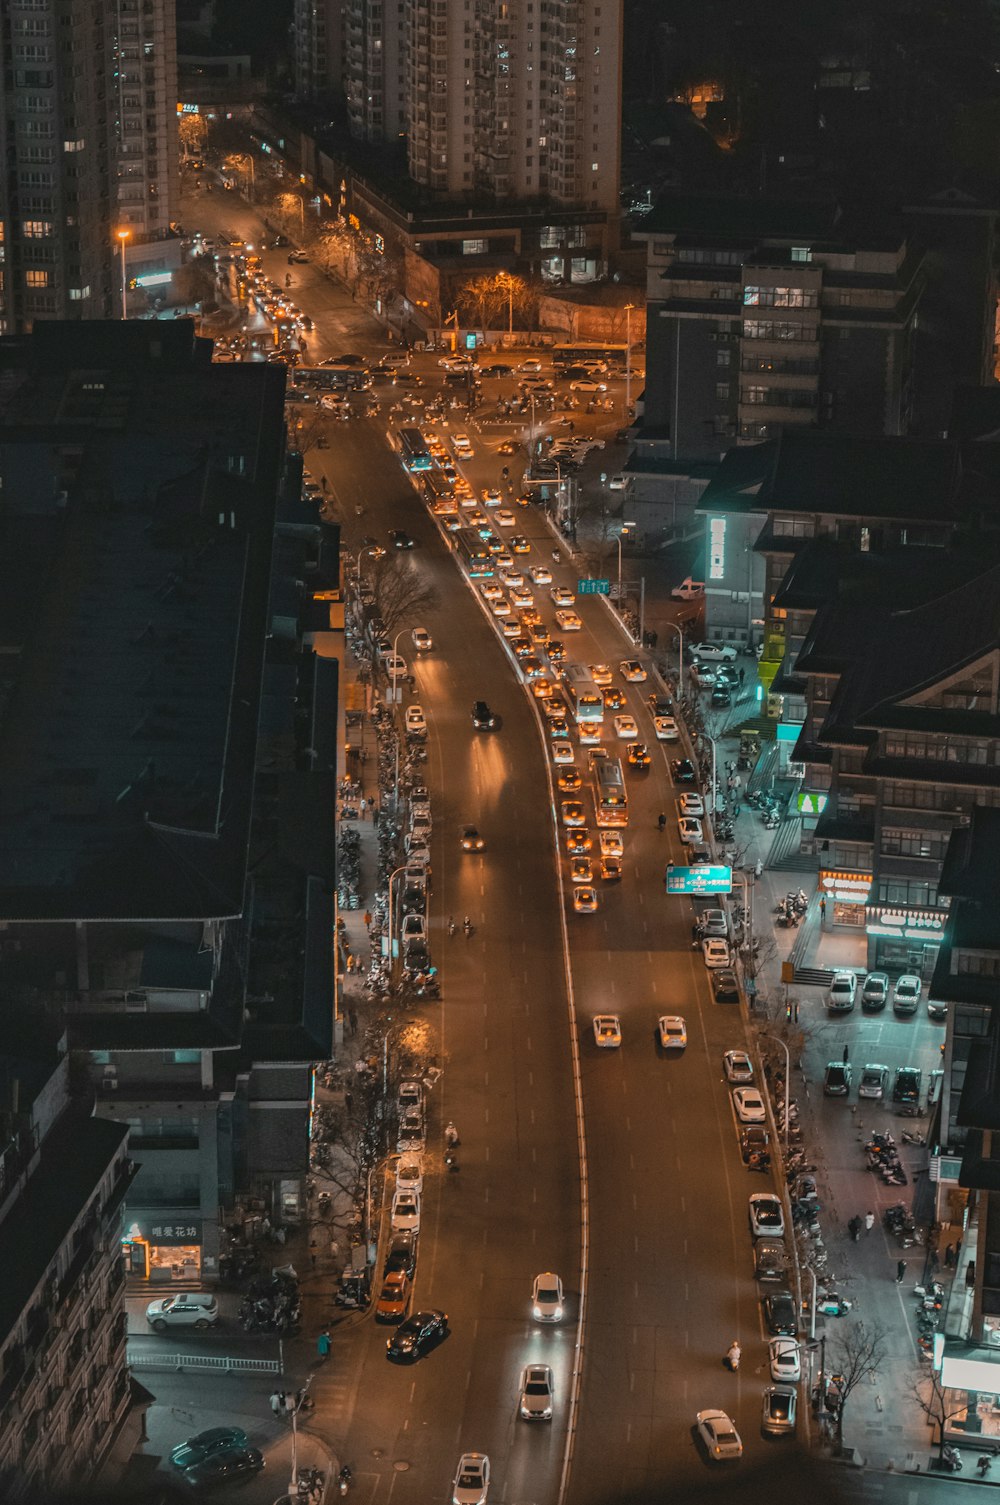 a city street filled with lots of traffic at night